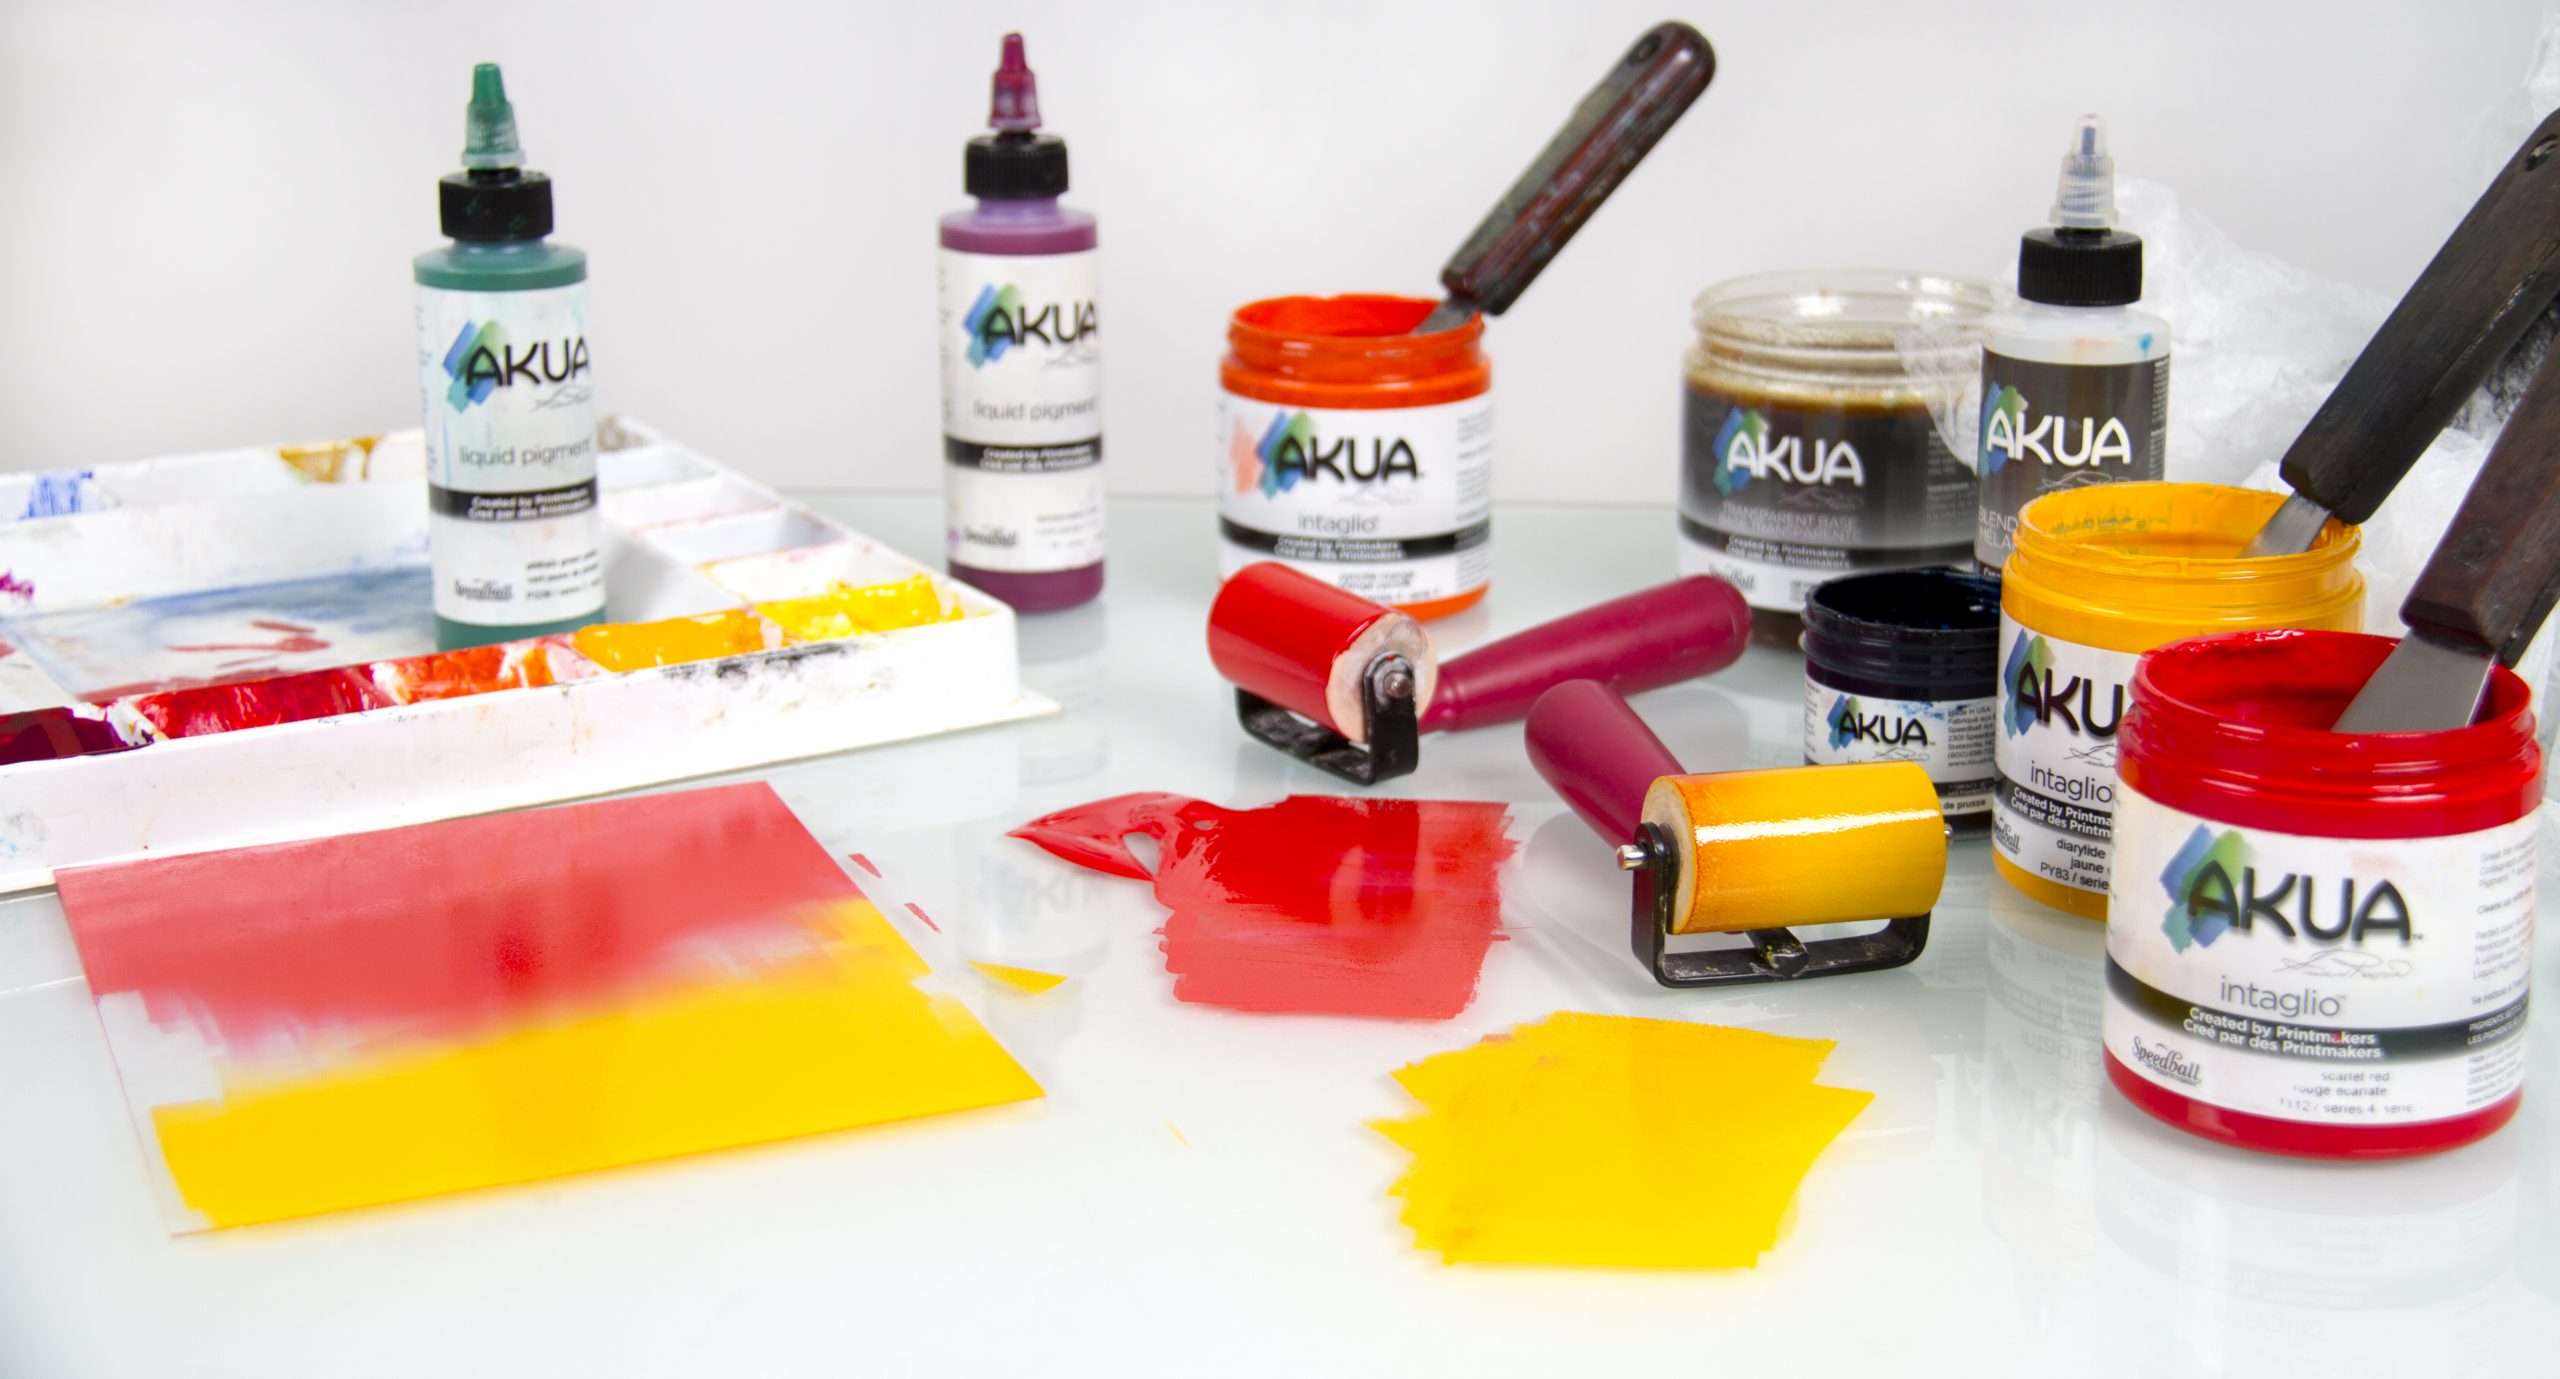 Learn Printmaking with Akua Inks from the Ink's Inventor, Susan